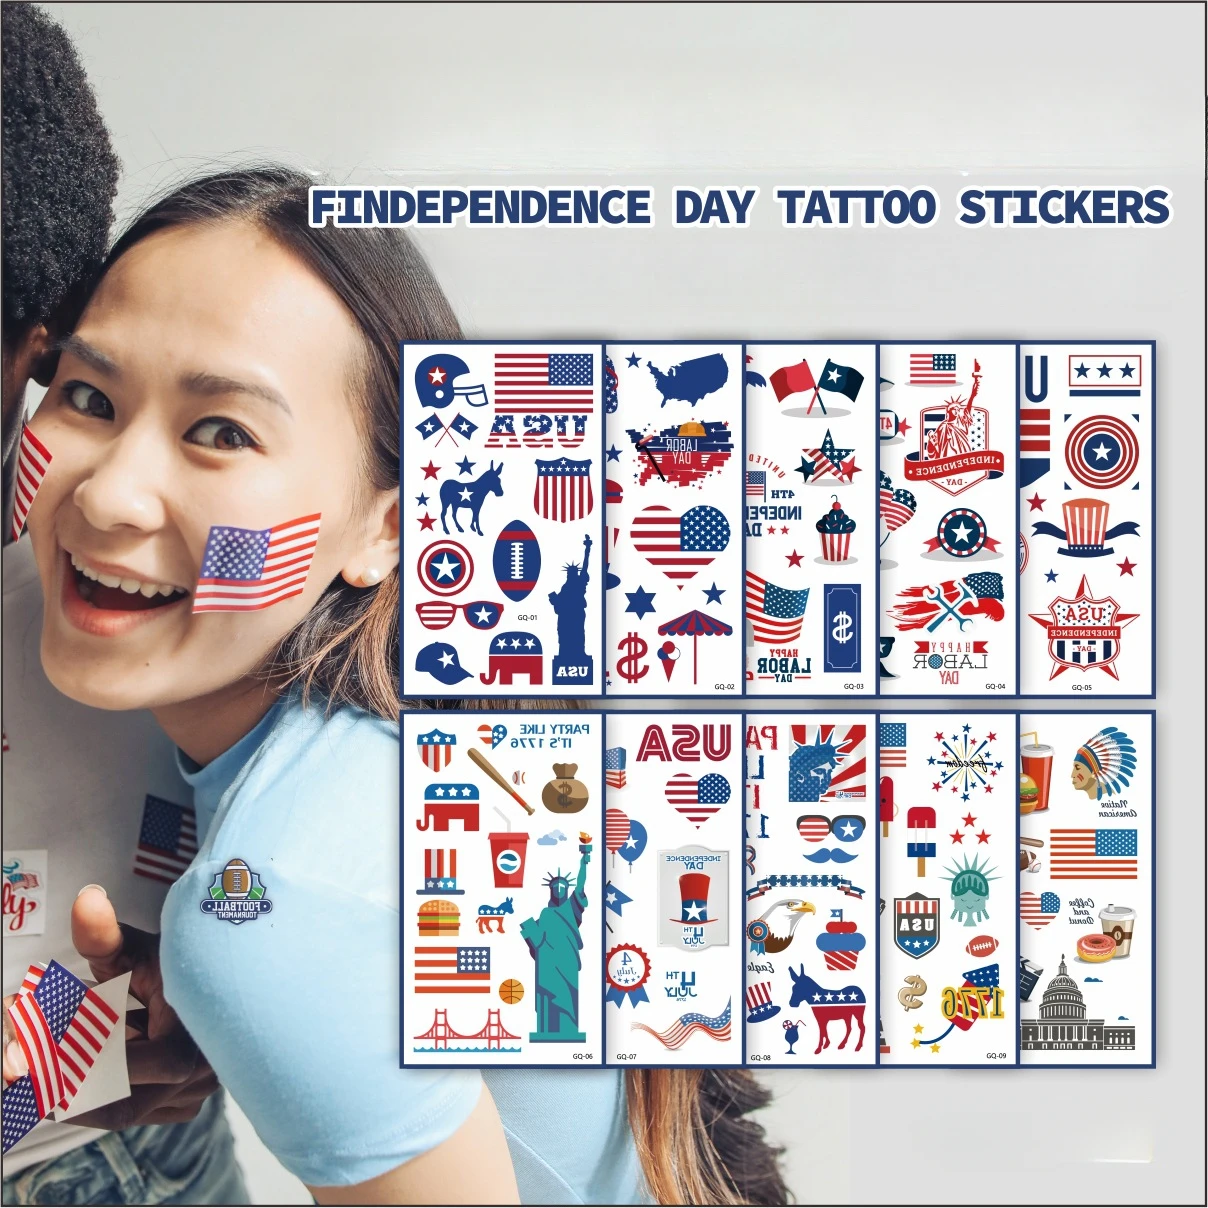 

Independence Day Waterproof Tattoo Sticker Bunny Child Body Decoration Sticker Personality Temporary Tattoos Fake Tattoo